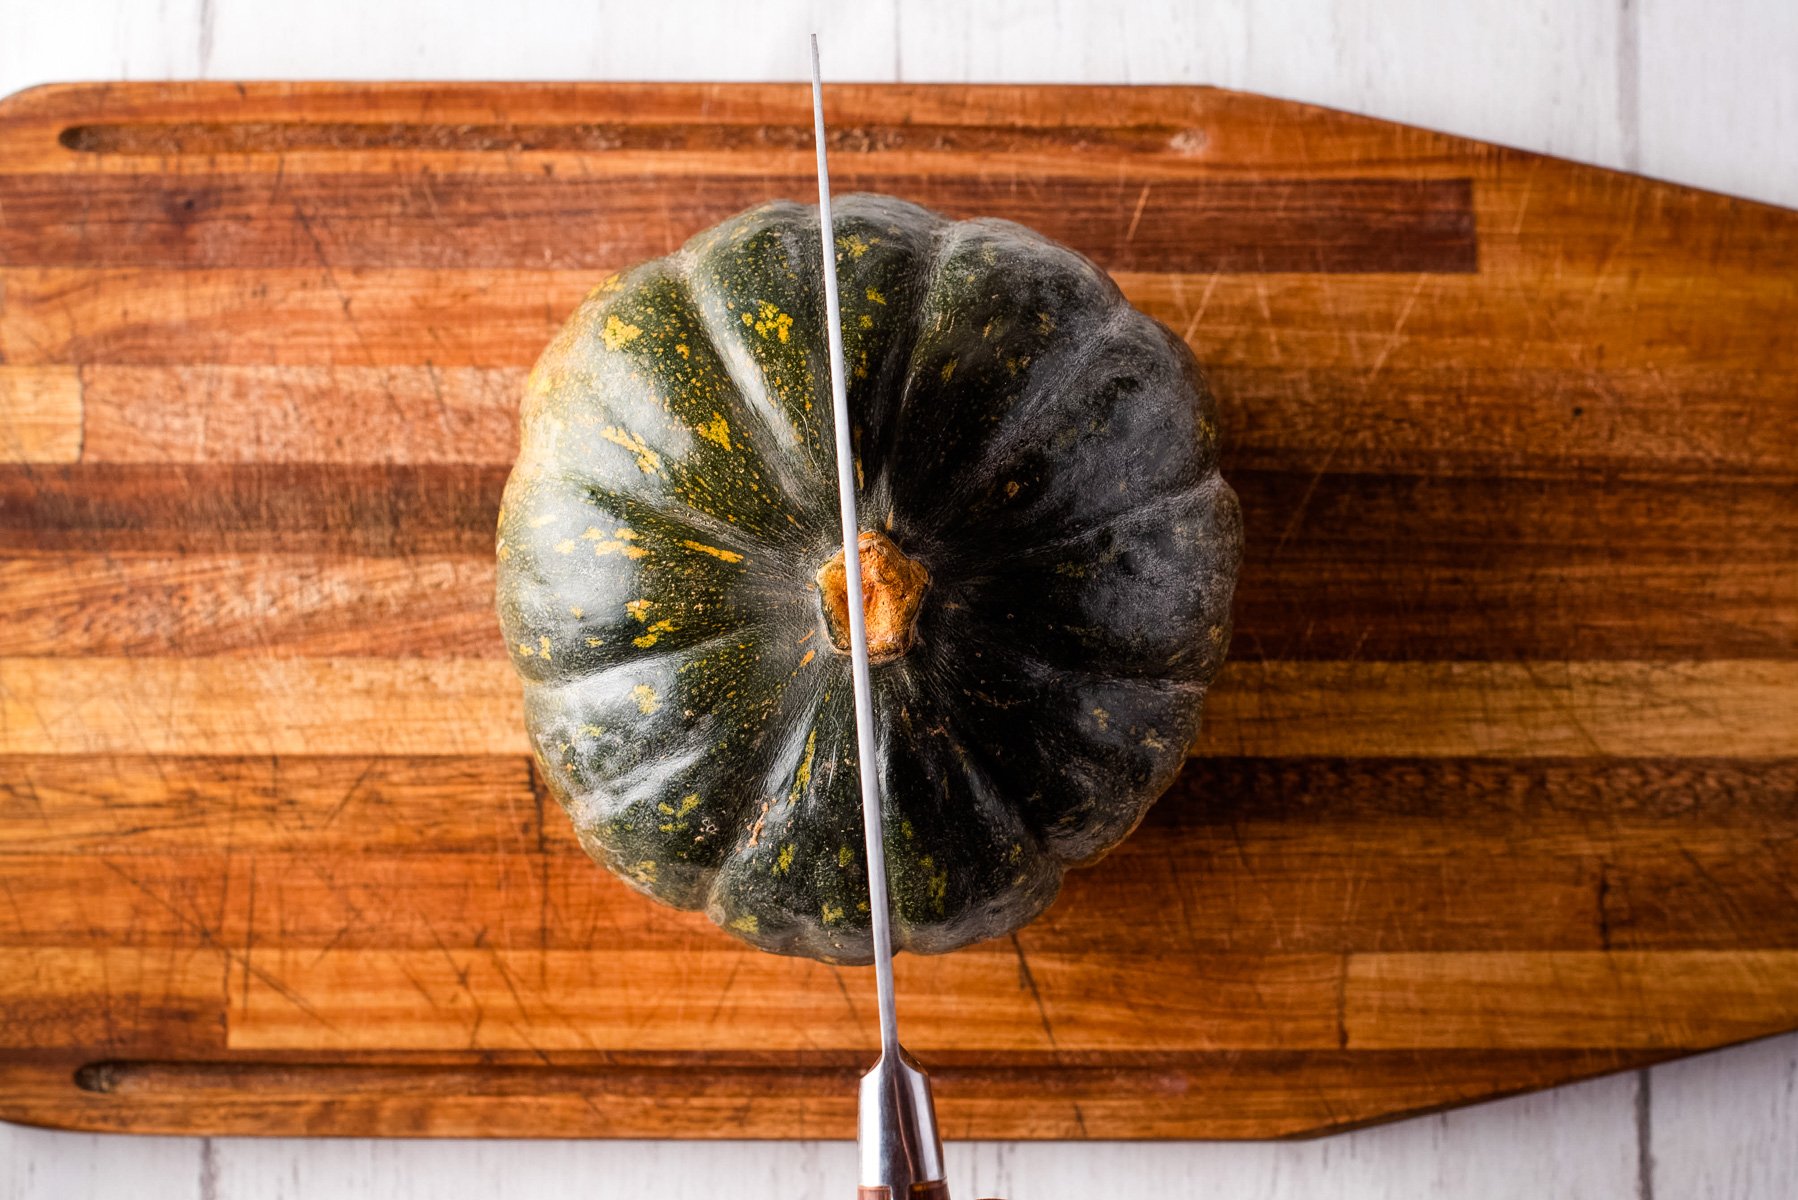 Overhead shot showing kabocha squash on a wooden cutting board, with knife positioned to cut it down the center.